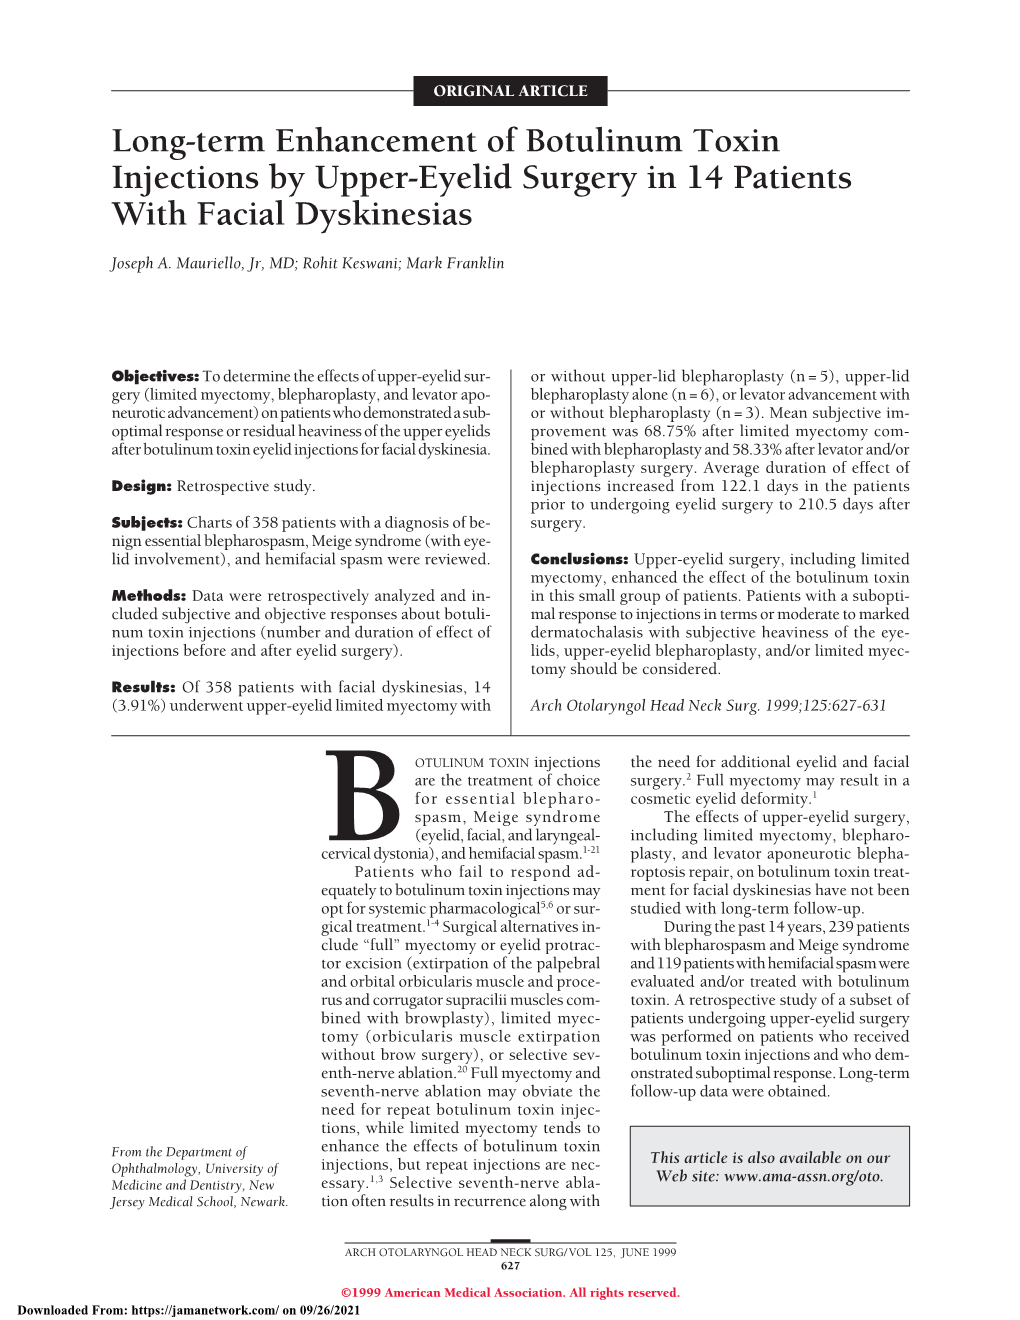 Long-Term Enhancement of Botulinum Toxin Injections by Upper-Eyelid Surgery in 14 Patients with Facial Dyskinesias